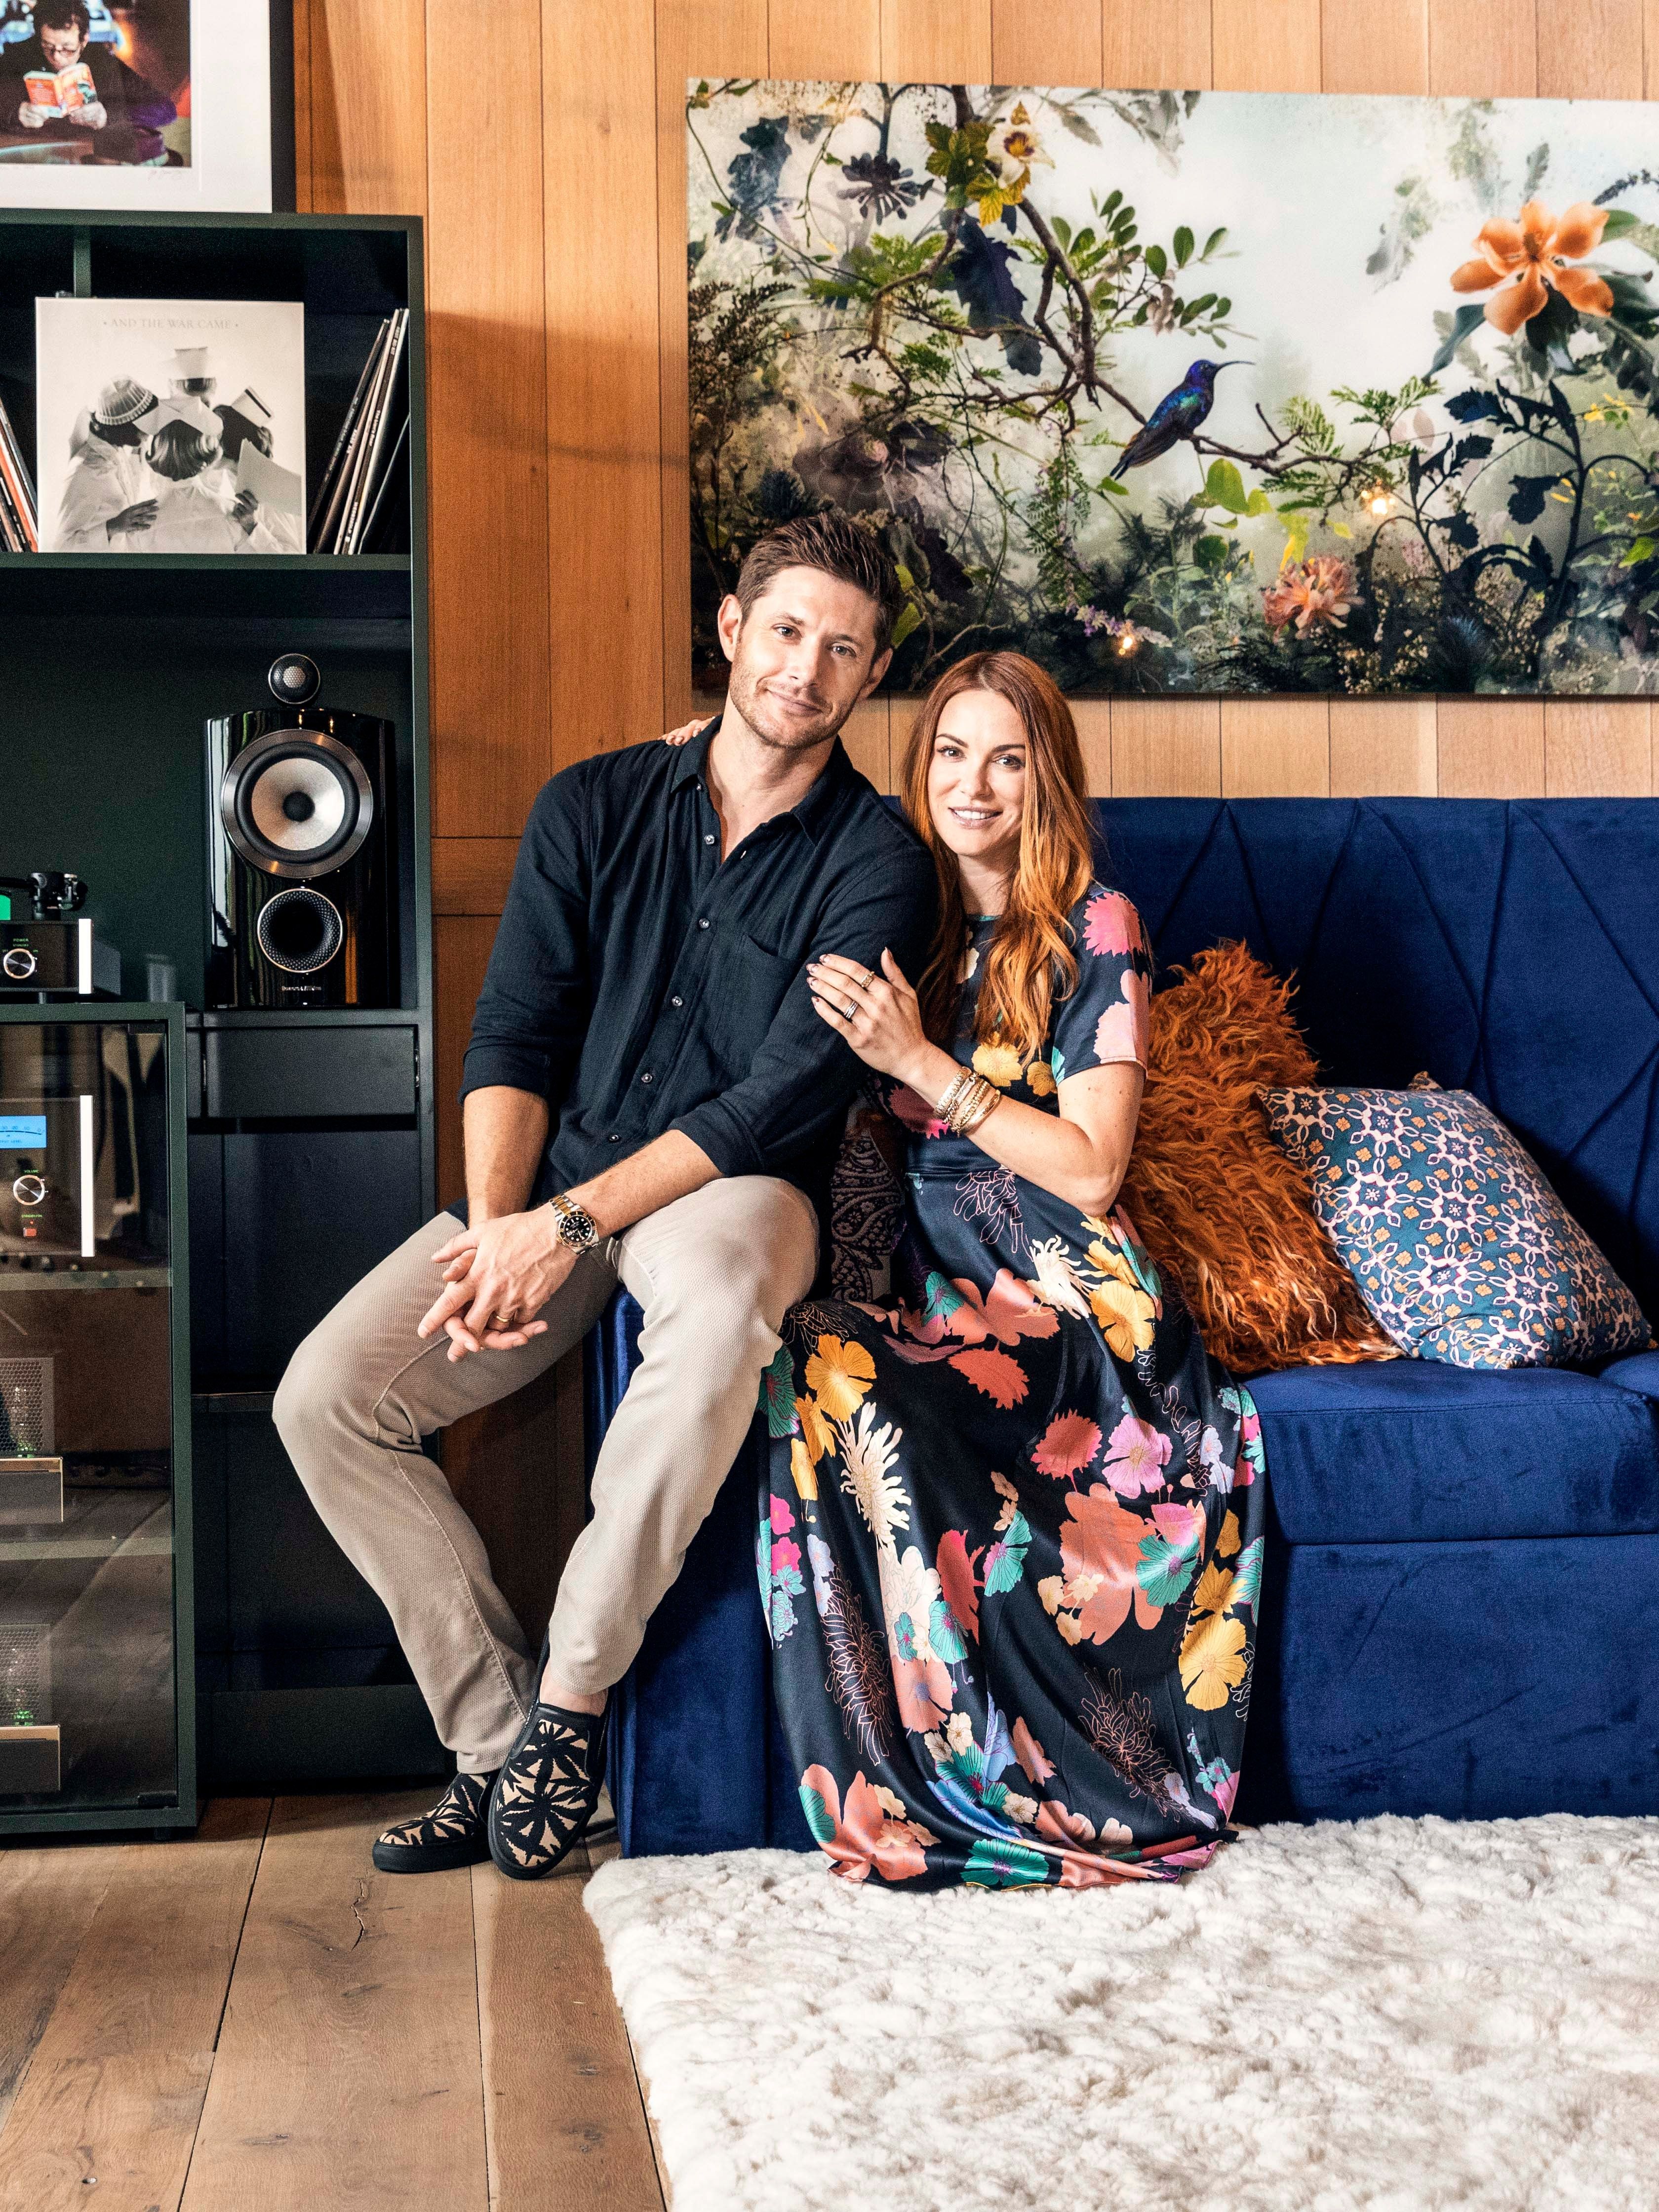 CW Star Jensen Ackles's Family Home in Austin Is an Eccentric Feast of Surprises